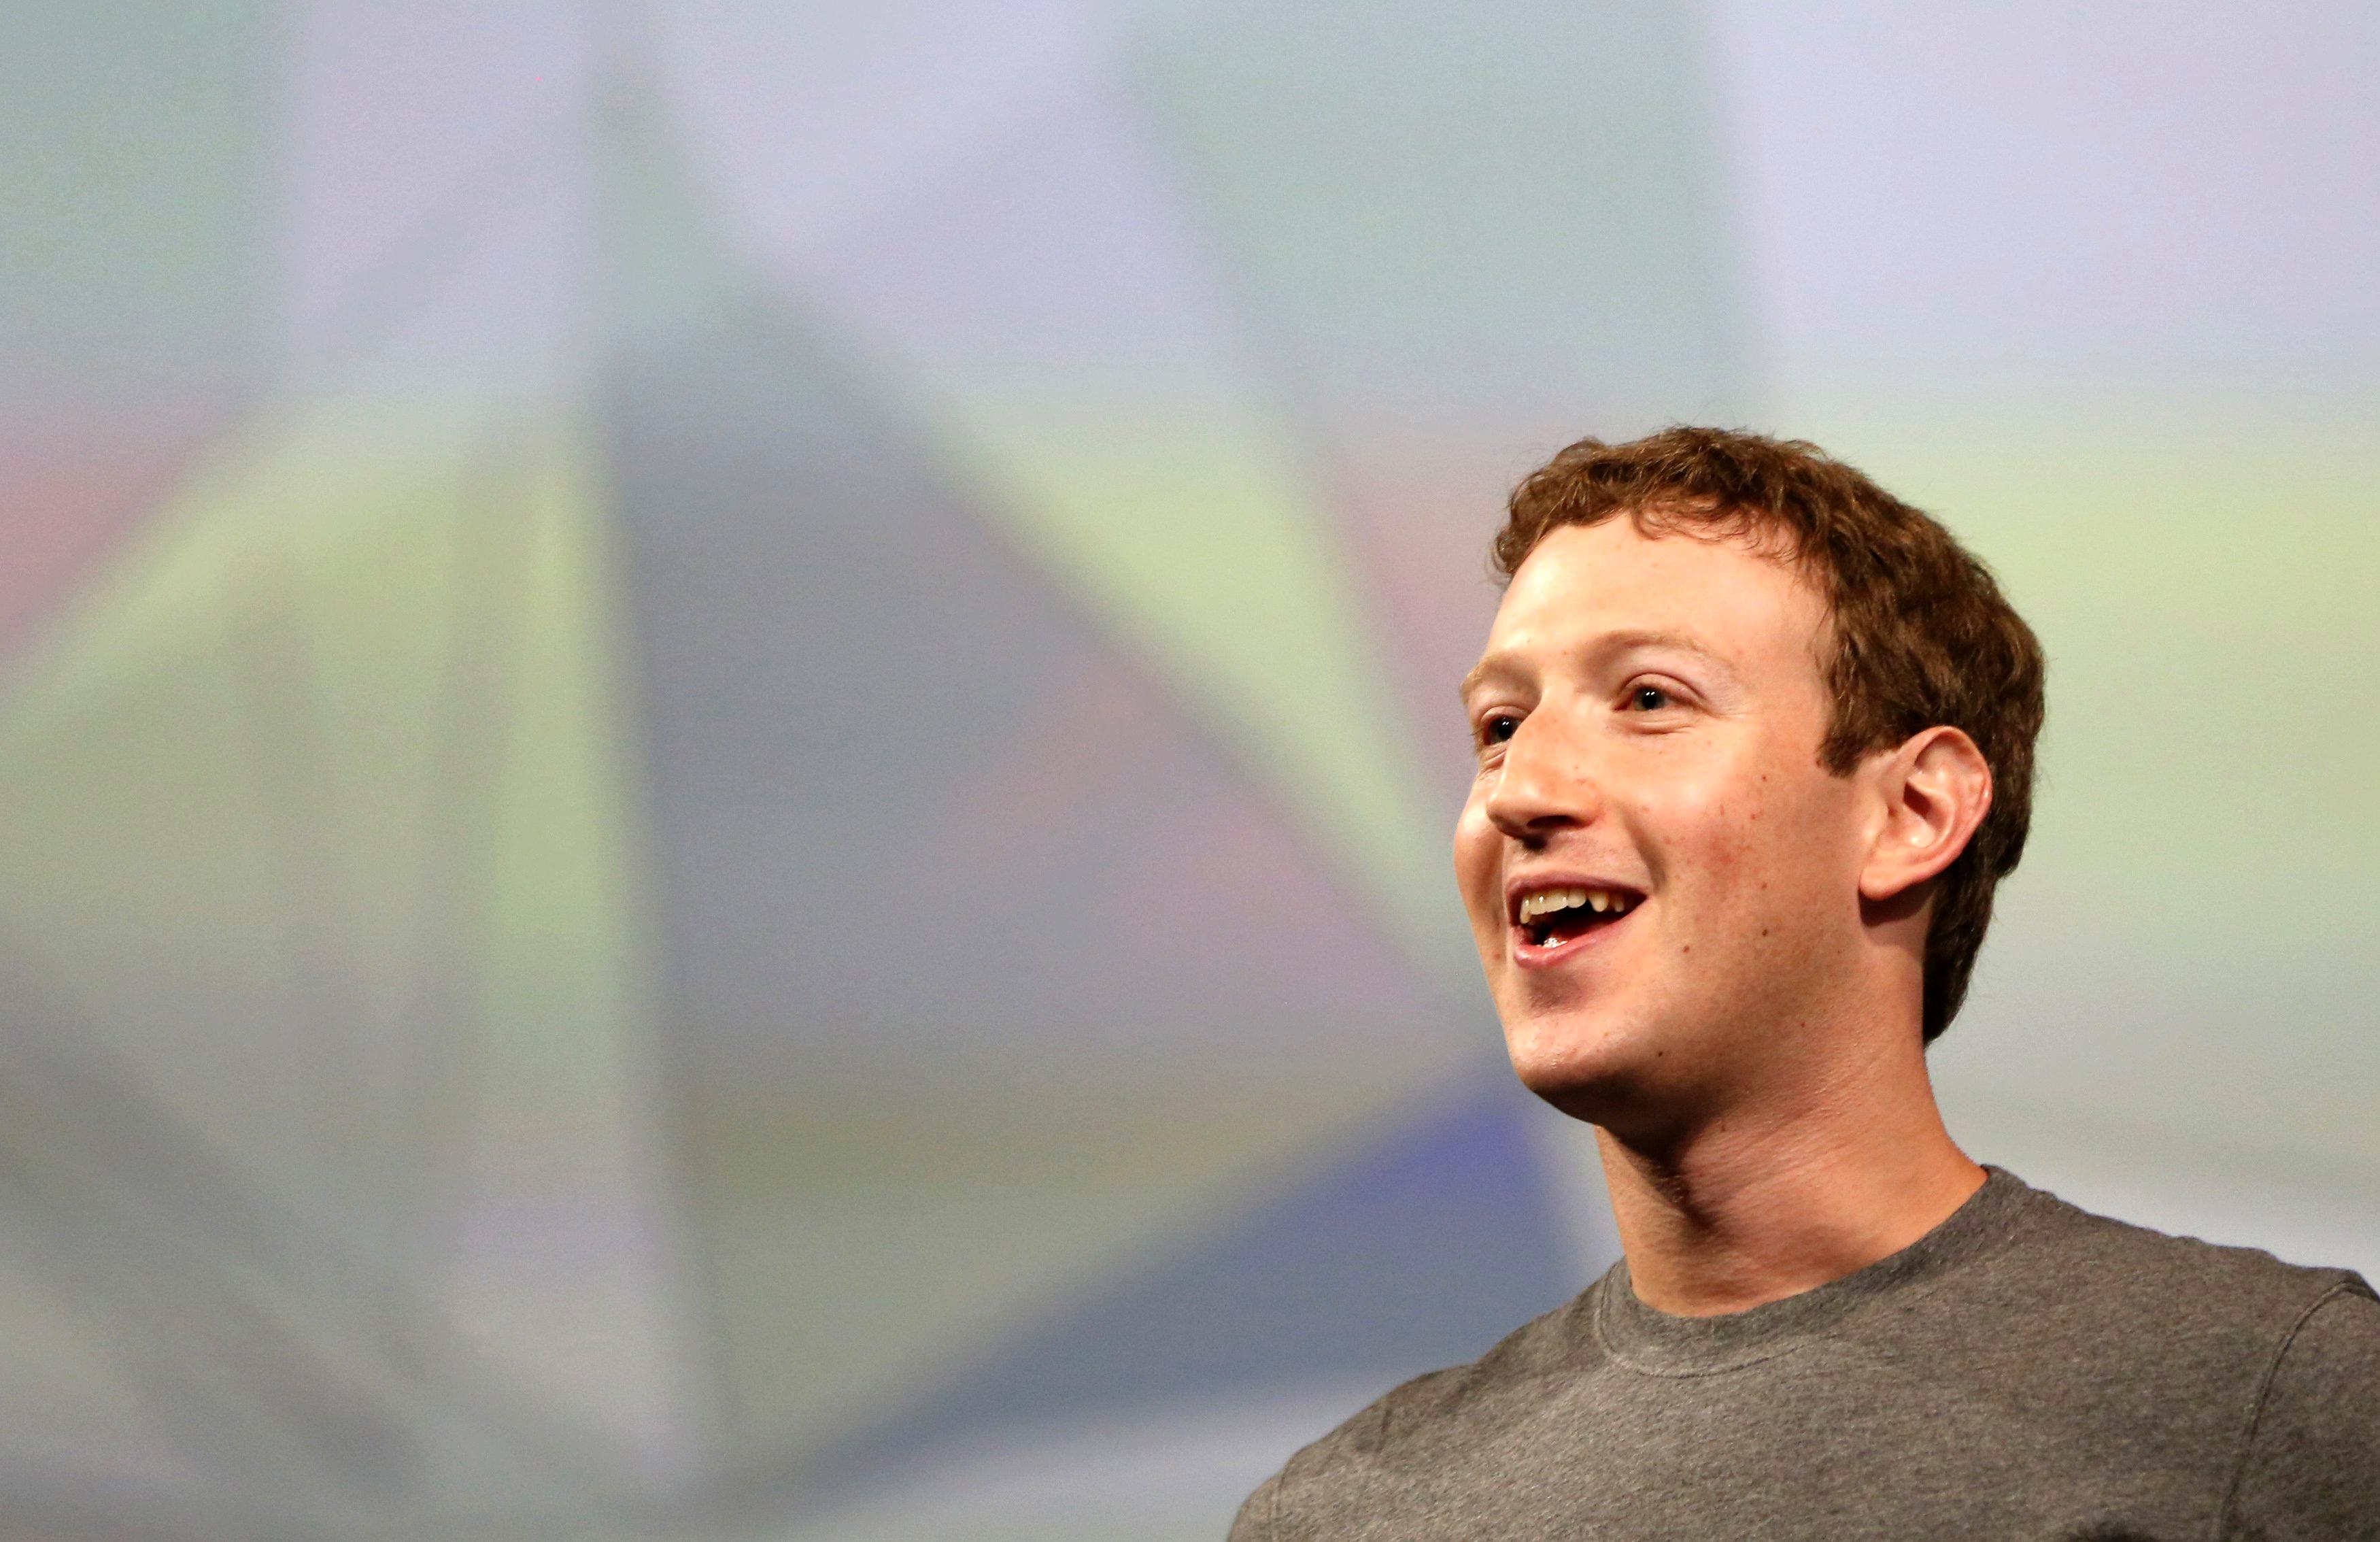 Facebook Launches Mobile Advertising Network to Follow You Across Apps